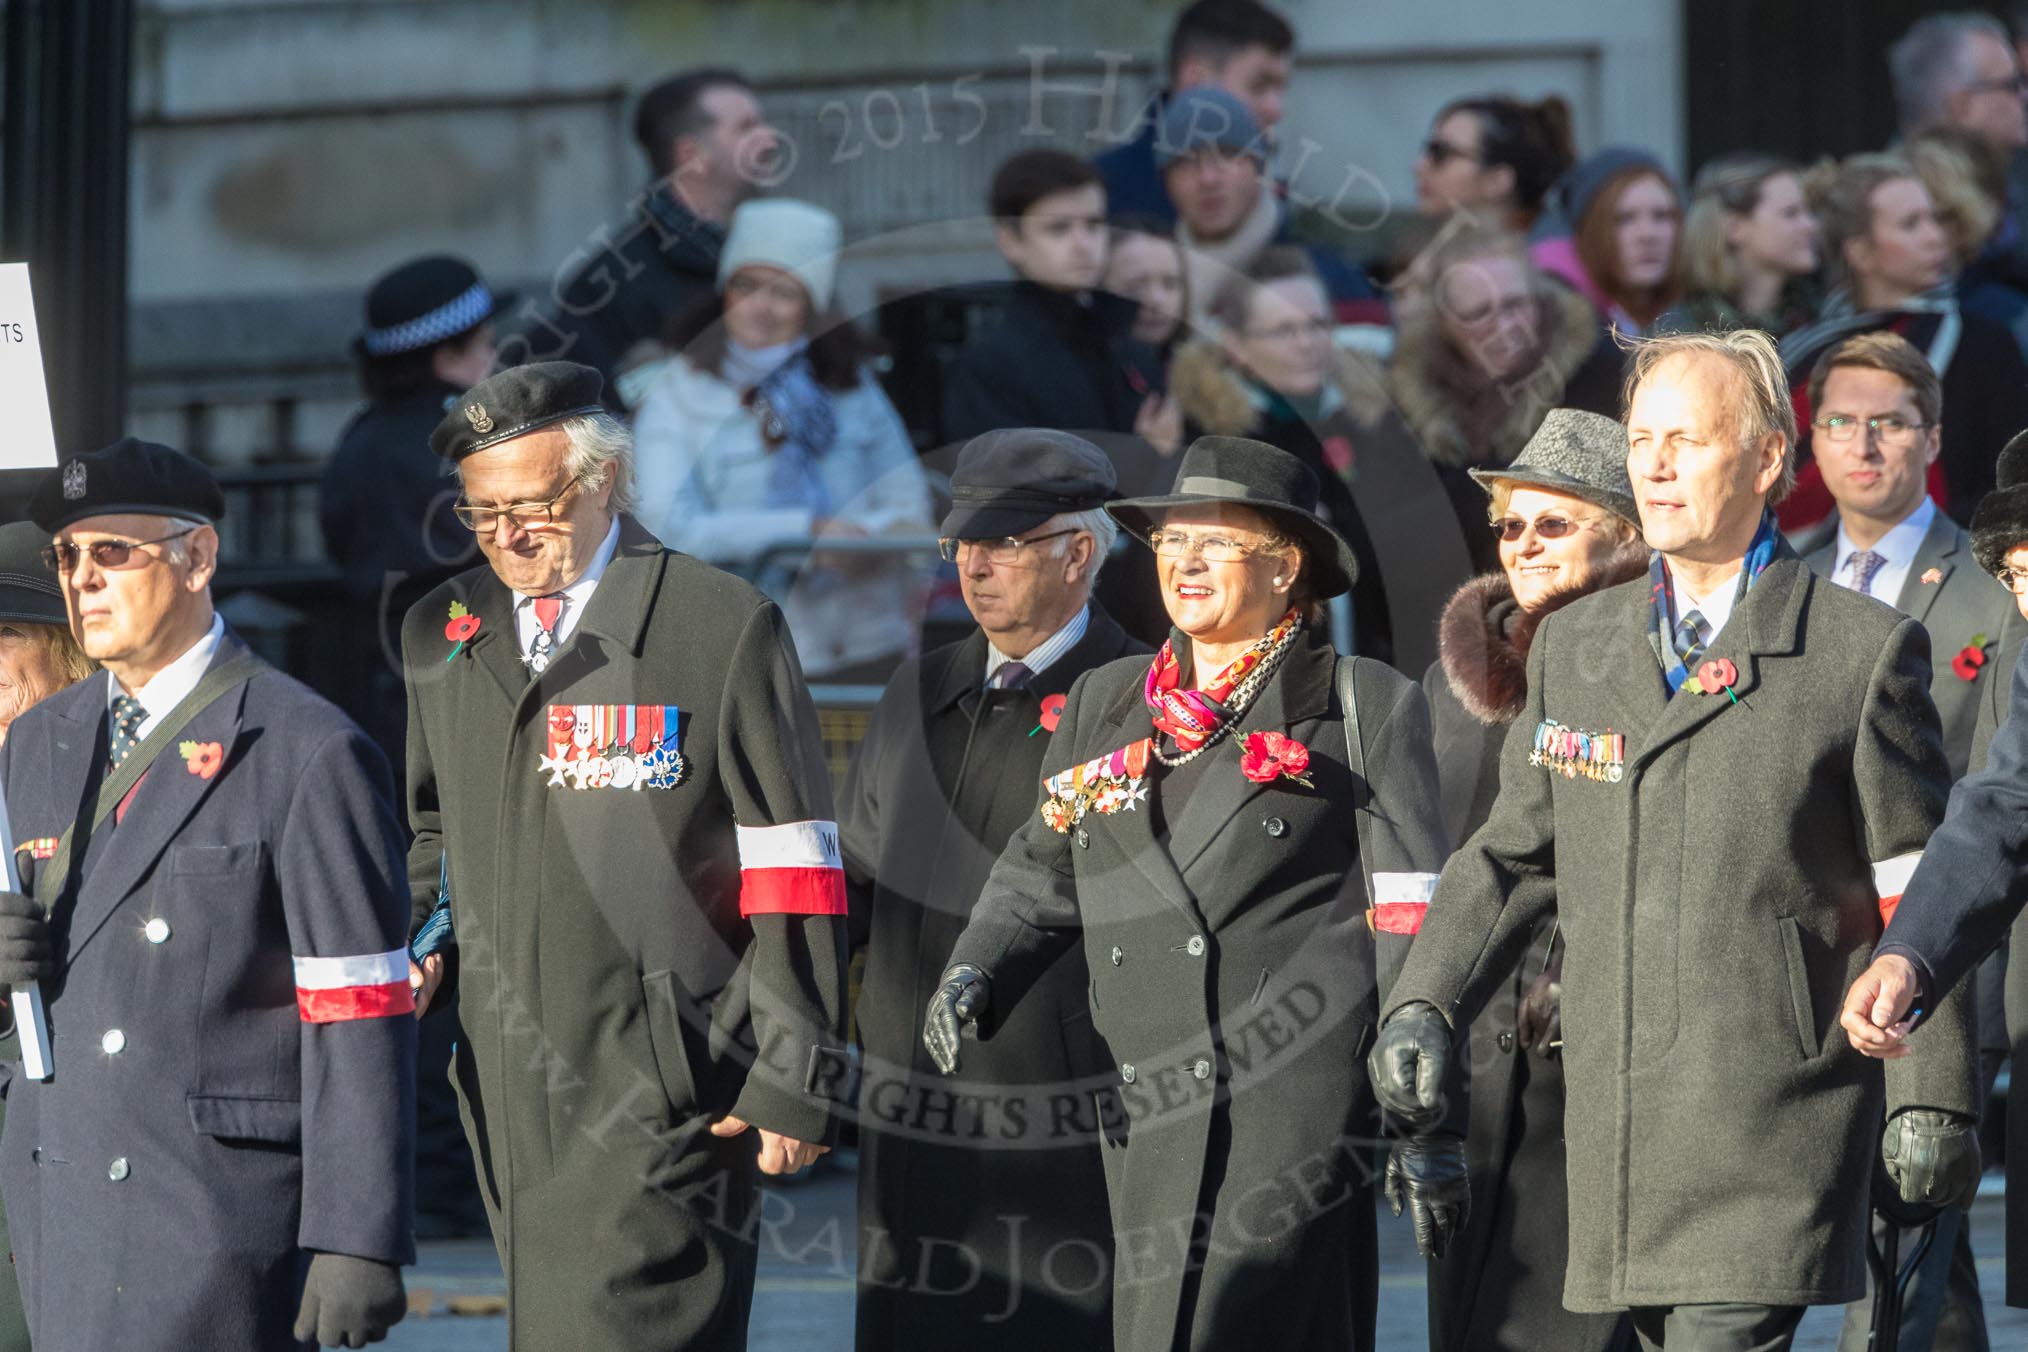 March Past, Remembrance Sunday at the Cenotaph 2016: M42 SPPW - Friends of Polish Veterans Association.
Cenotaph, Whitehall, London SW1,
London,
Greater London,
United Kingdom,
on 13 November 2016 at 13:19, image #2968